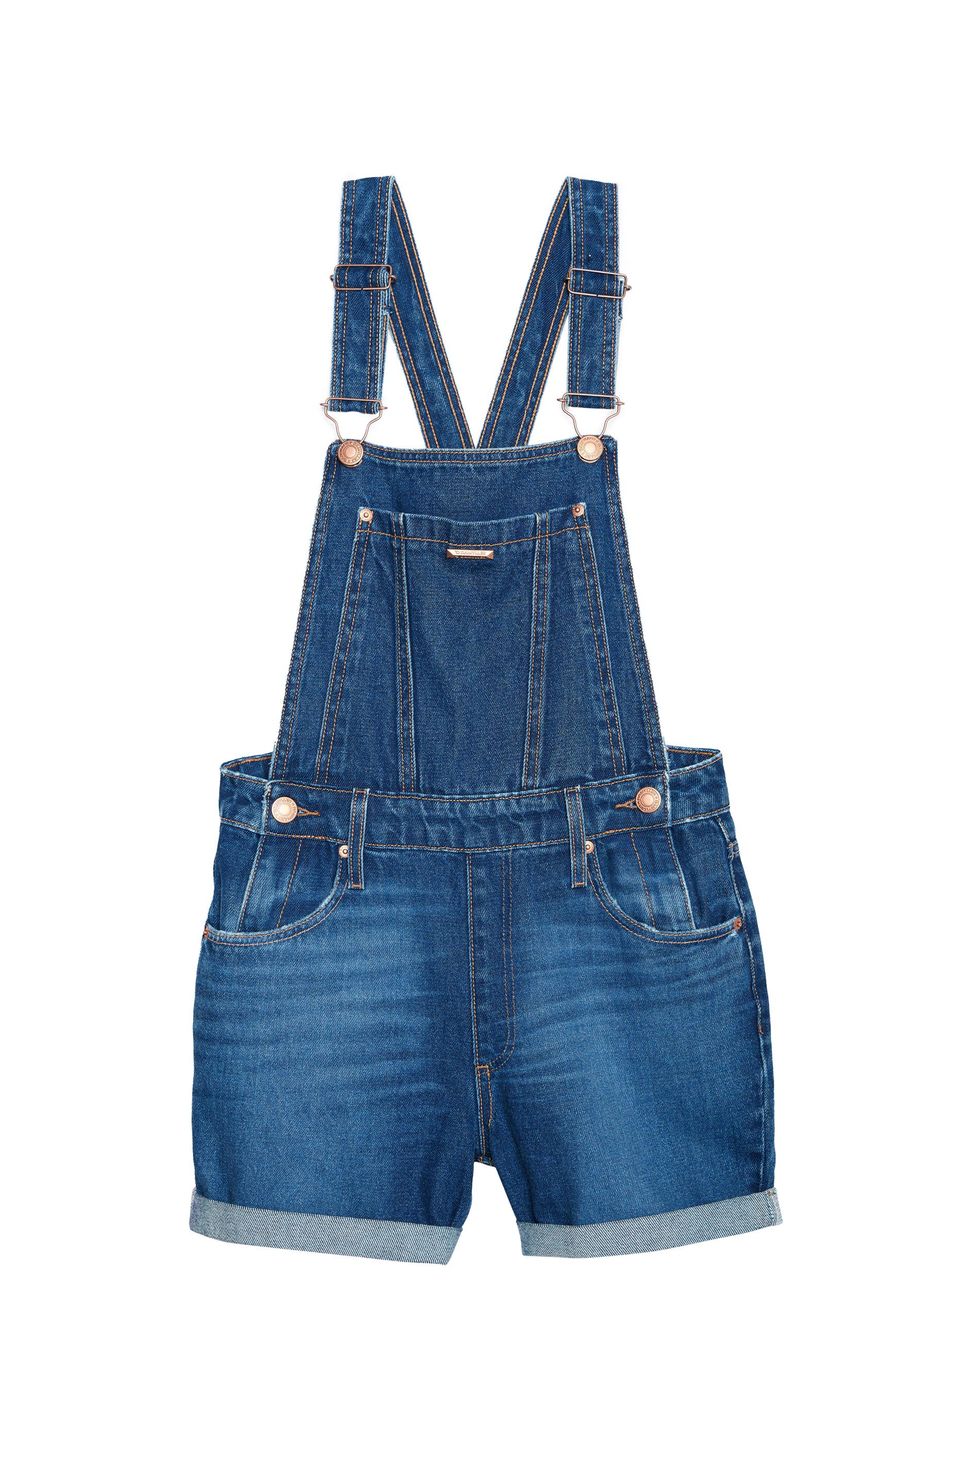 Promod dungaree Navy Blue M discount 78% WOMEN FASHION Baby Jumpsuits & Dungarees Jean Dungaree 